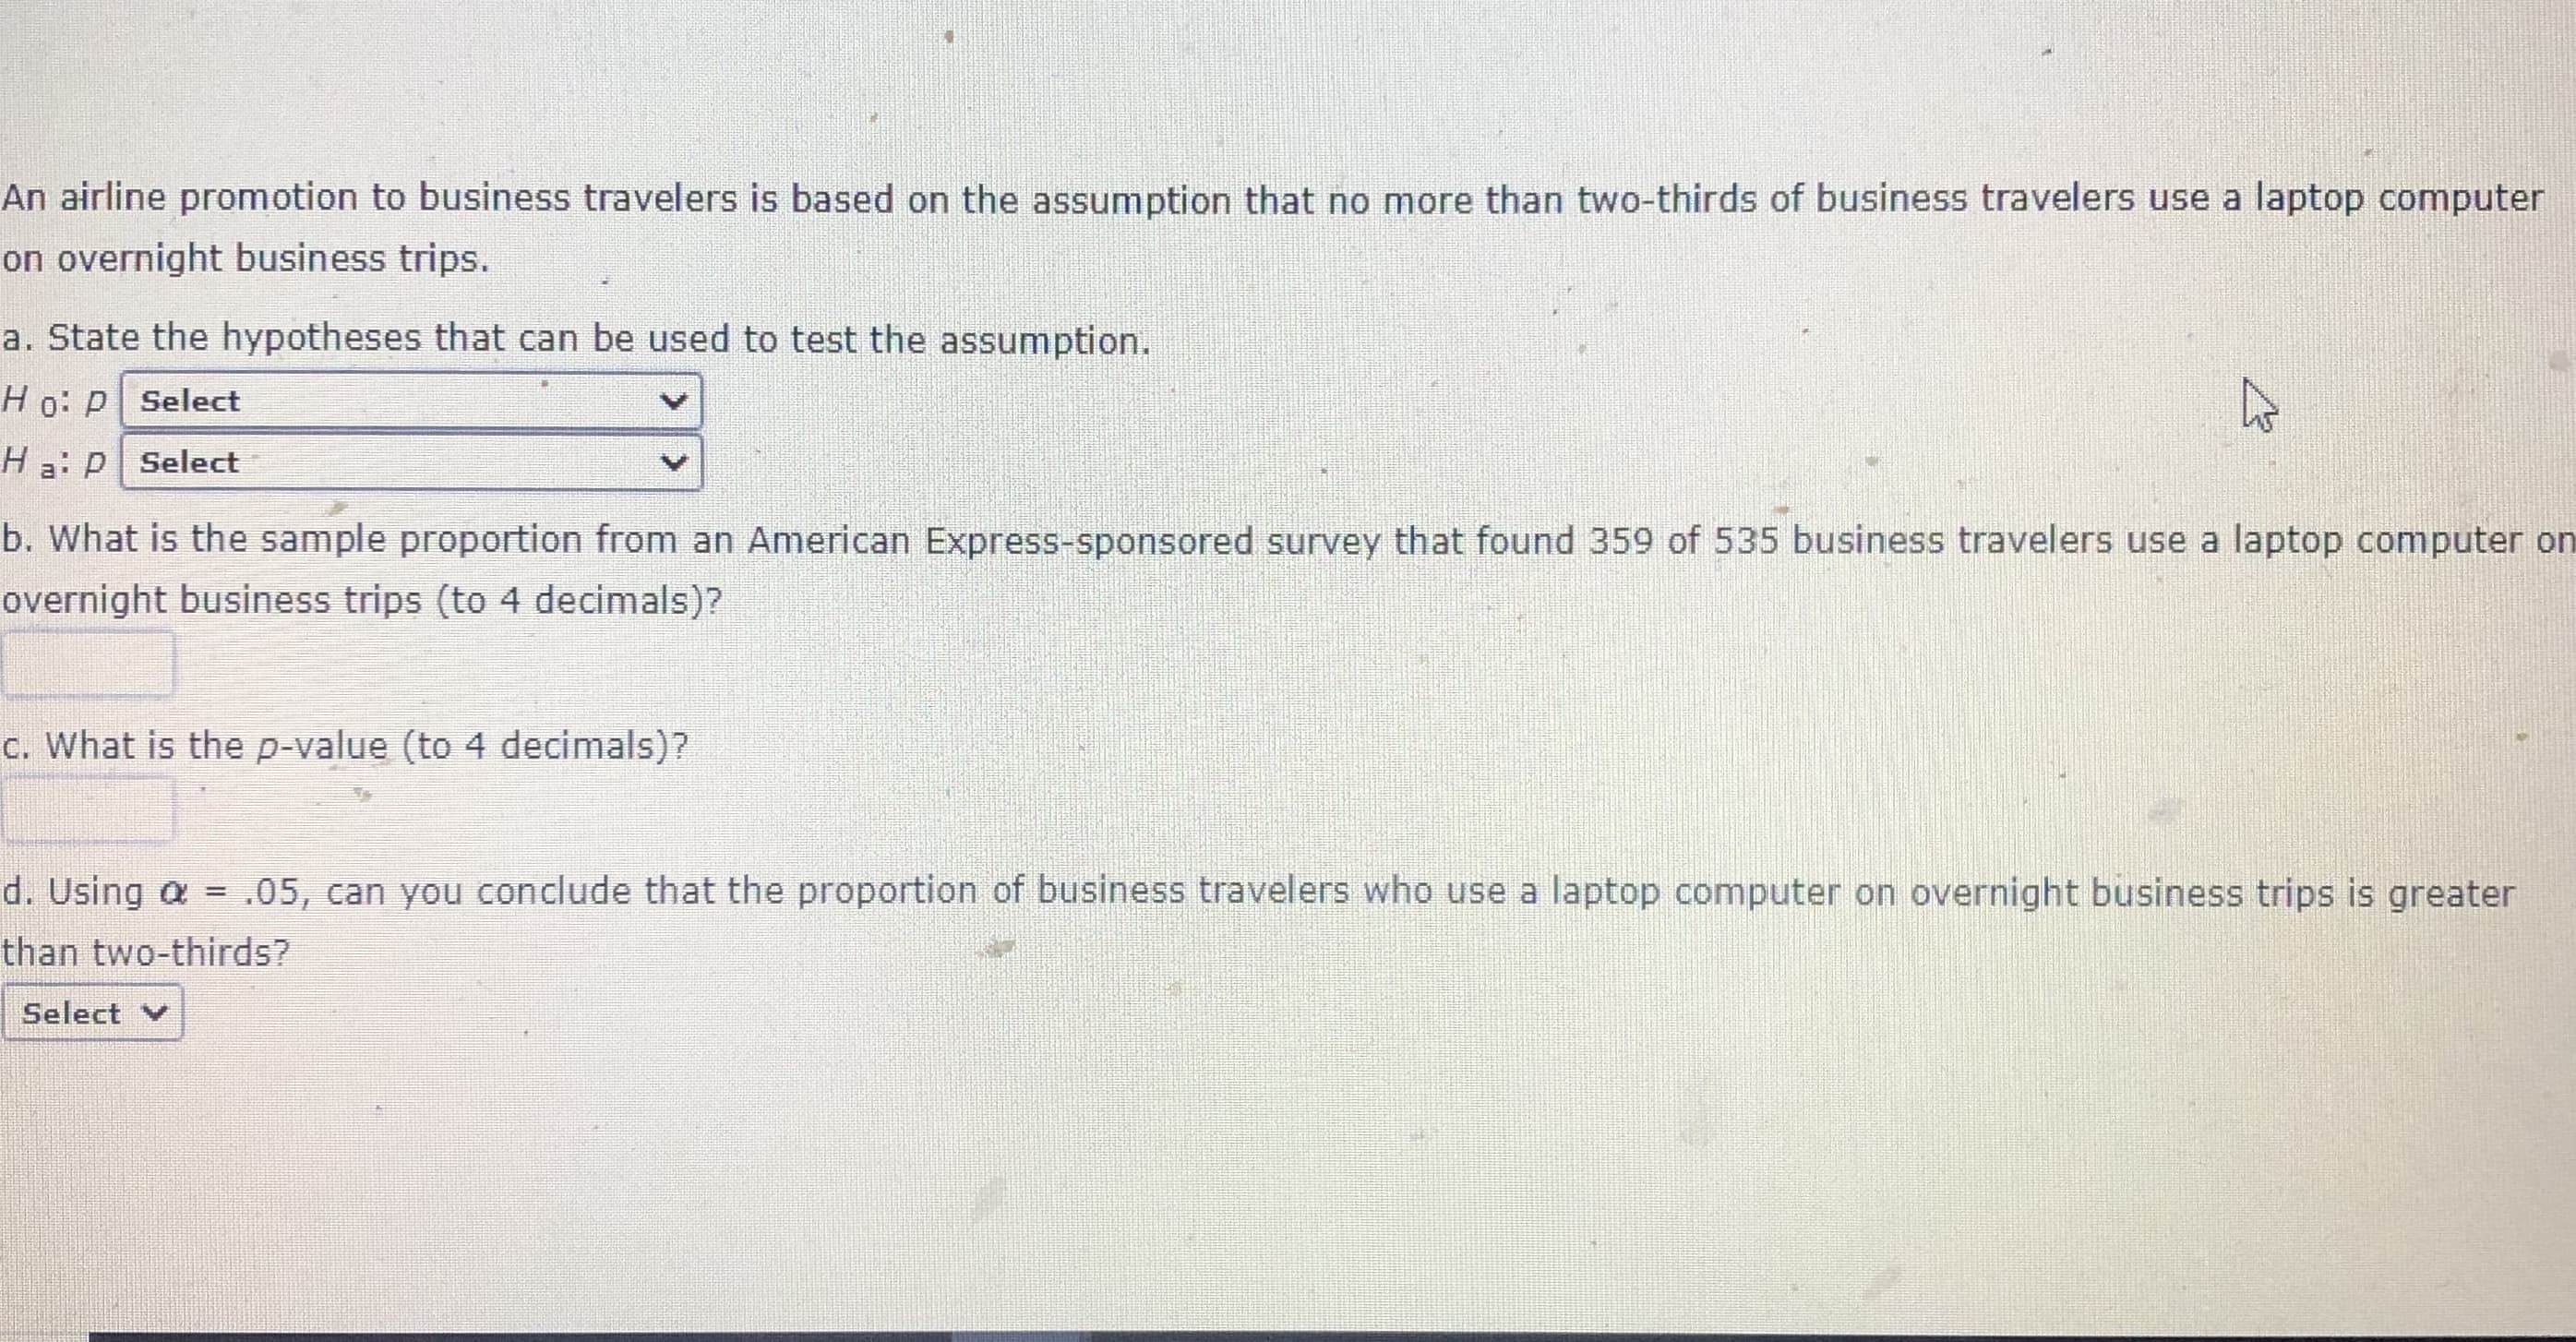 An airline promotion to business travelers is based on the assumption that no more than two-thirds of business travelers use a laptop computer
on overnight business trips.
a. State the hypotheses that can be used to test the assumption.
